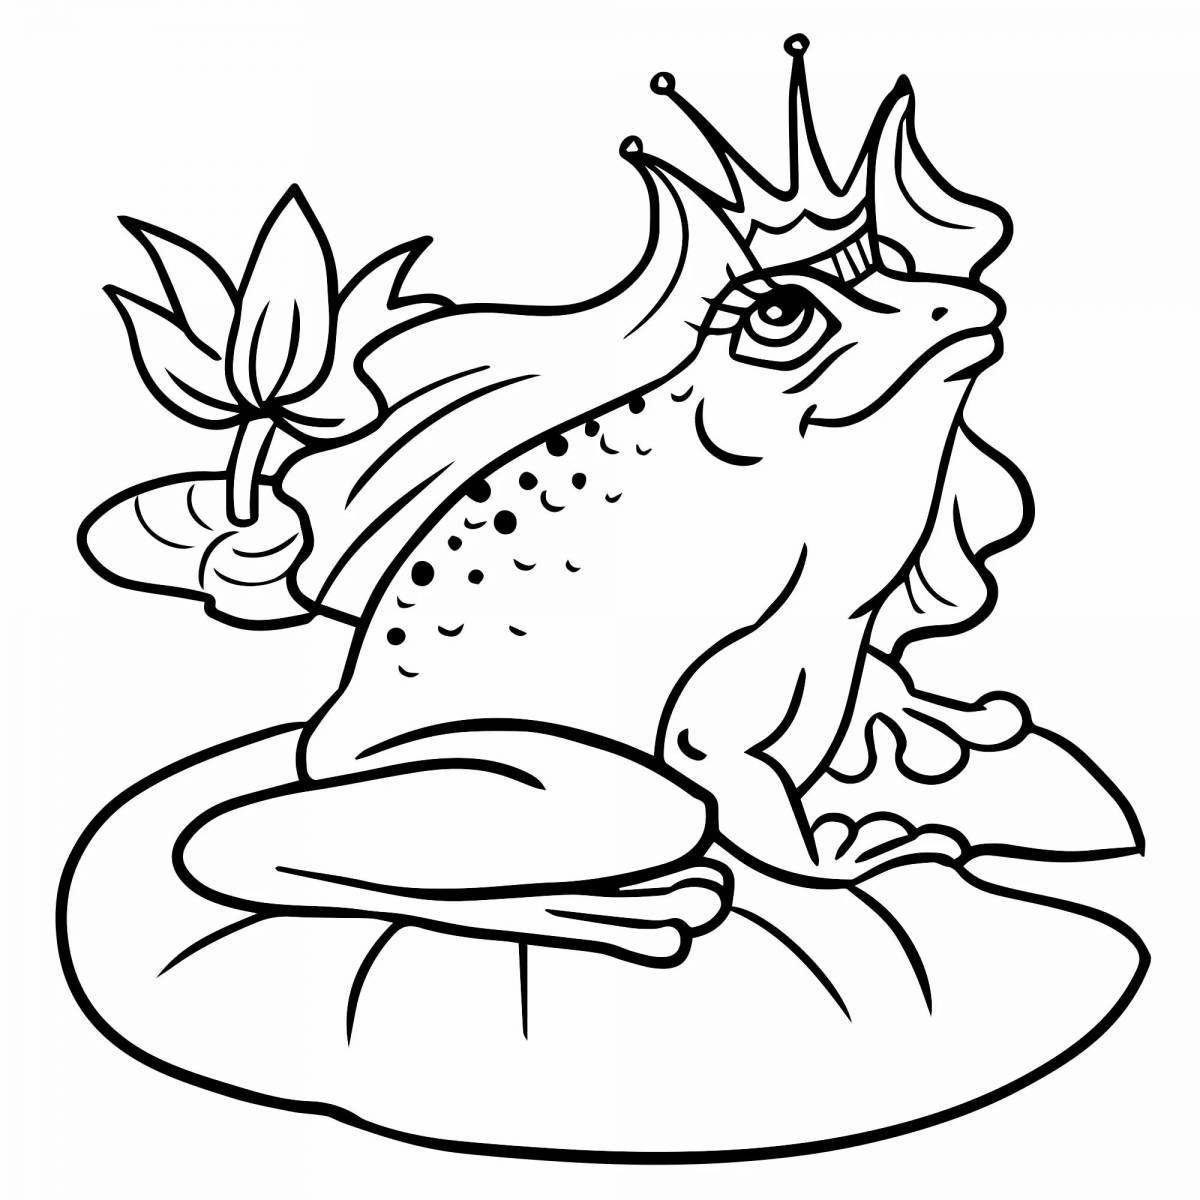 Playful frog princess coloring page for kids